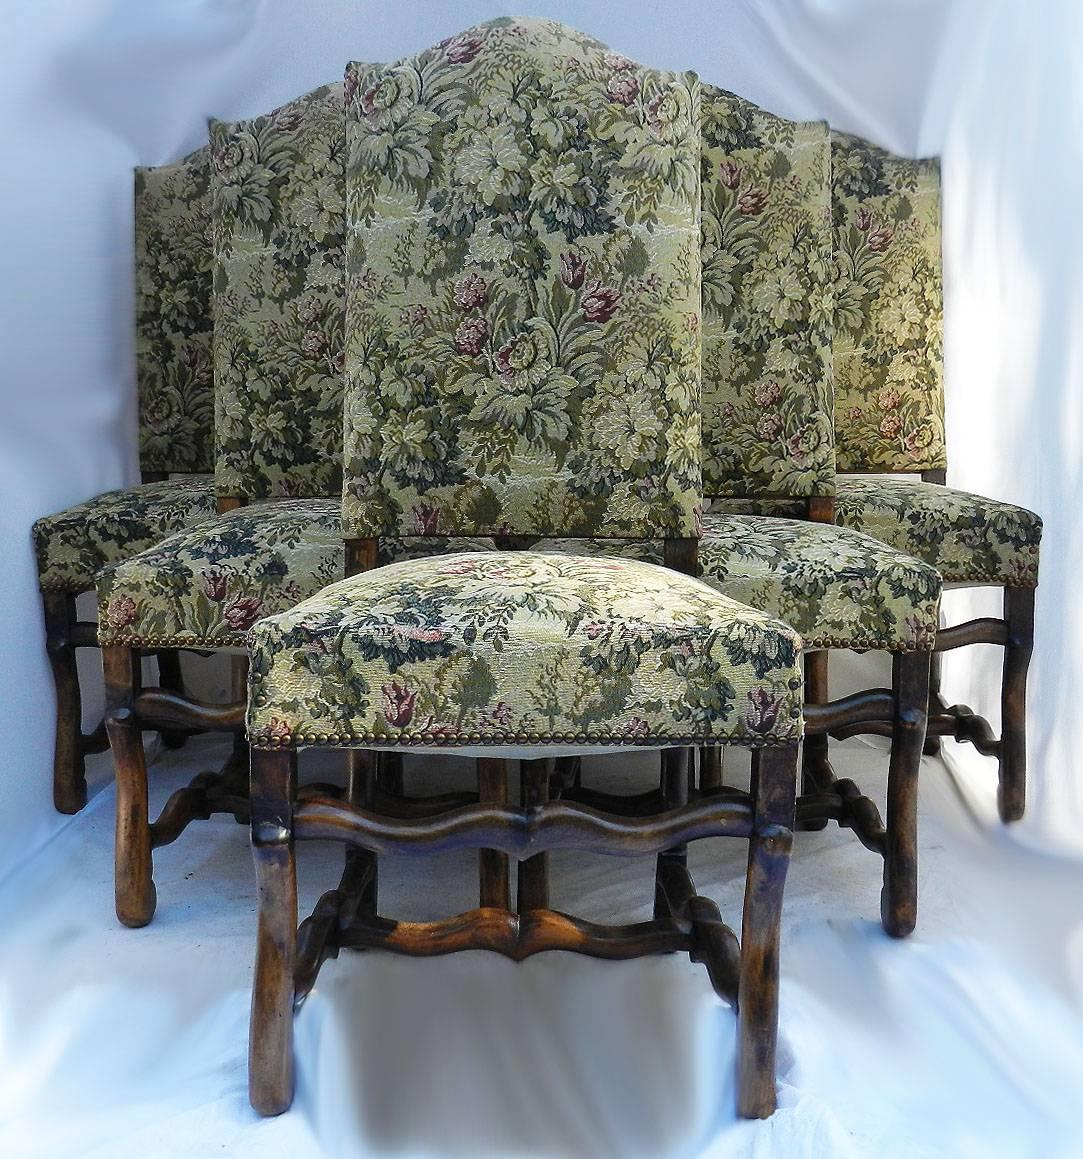 Upholstery Six Dining Chairs Os de Mouton Original French Tapestry or to Recover